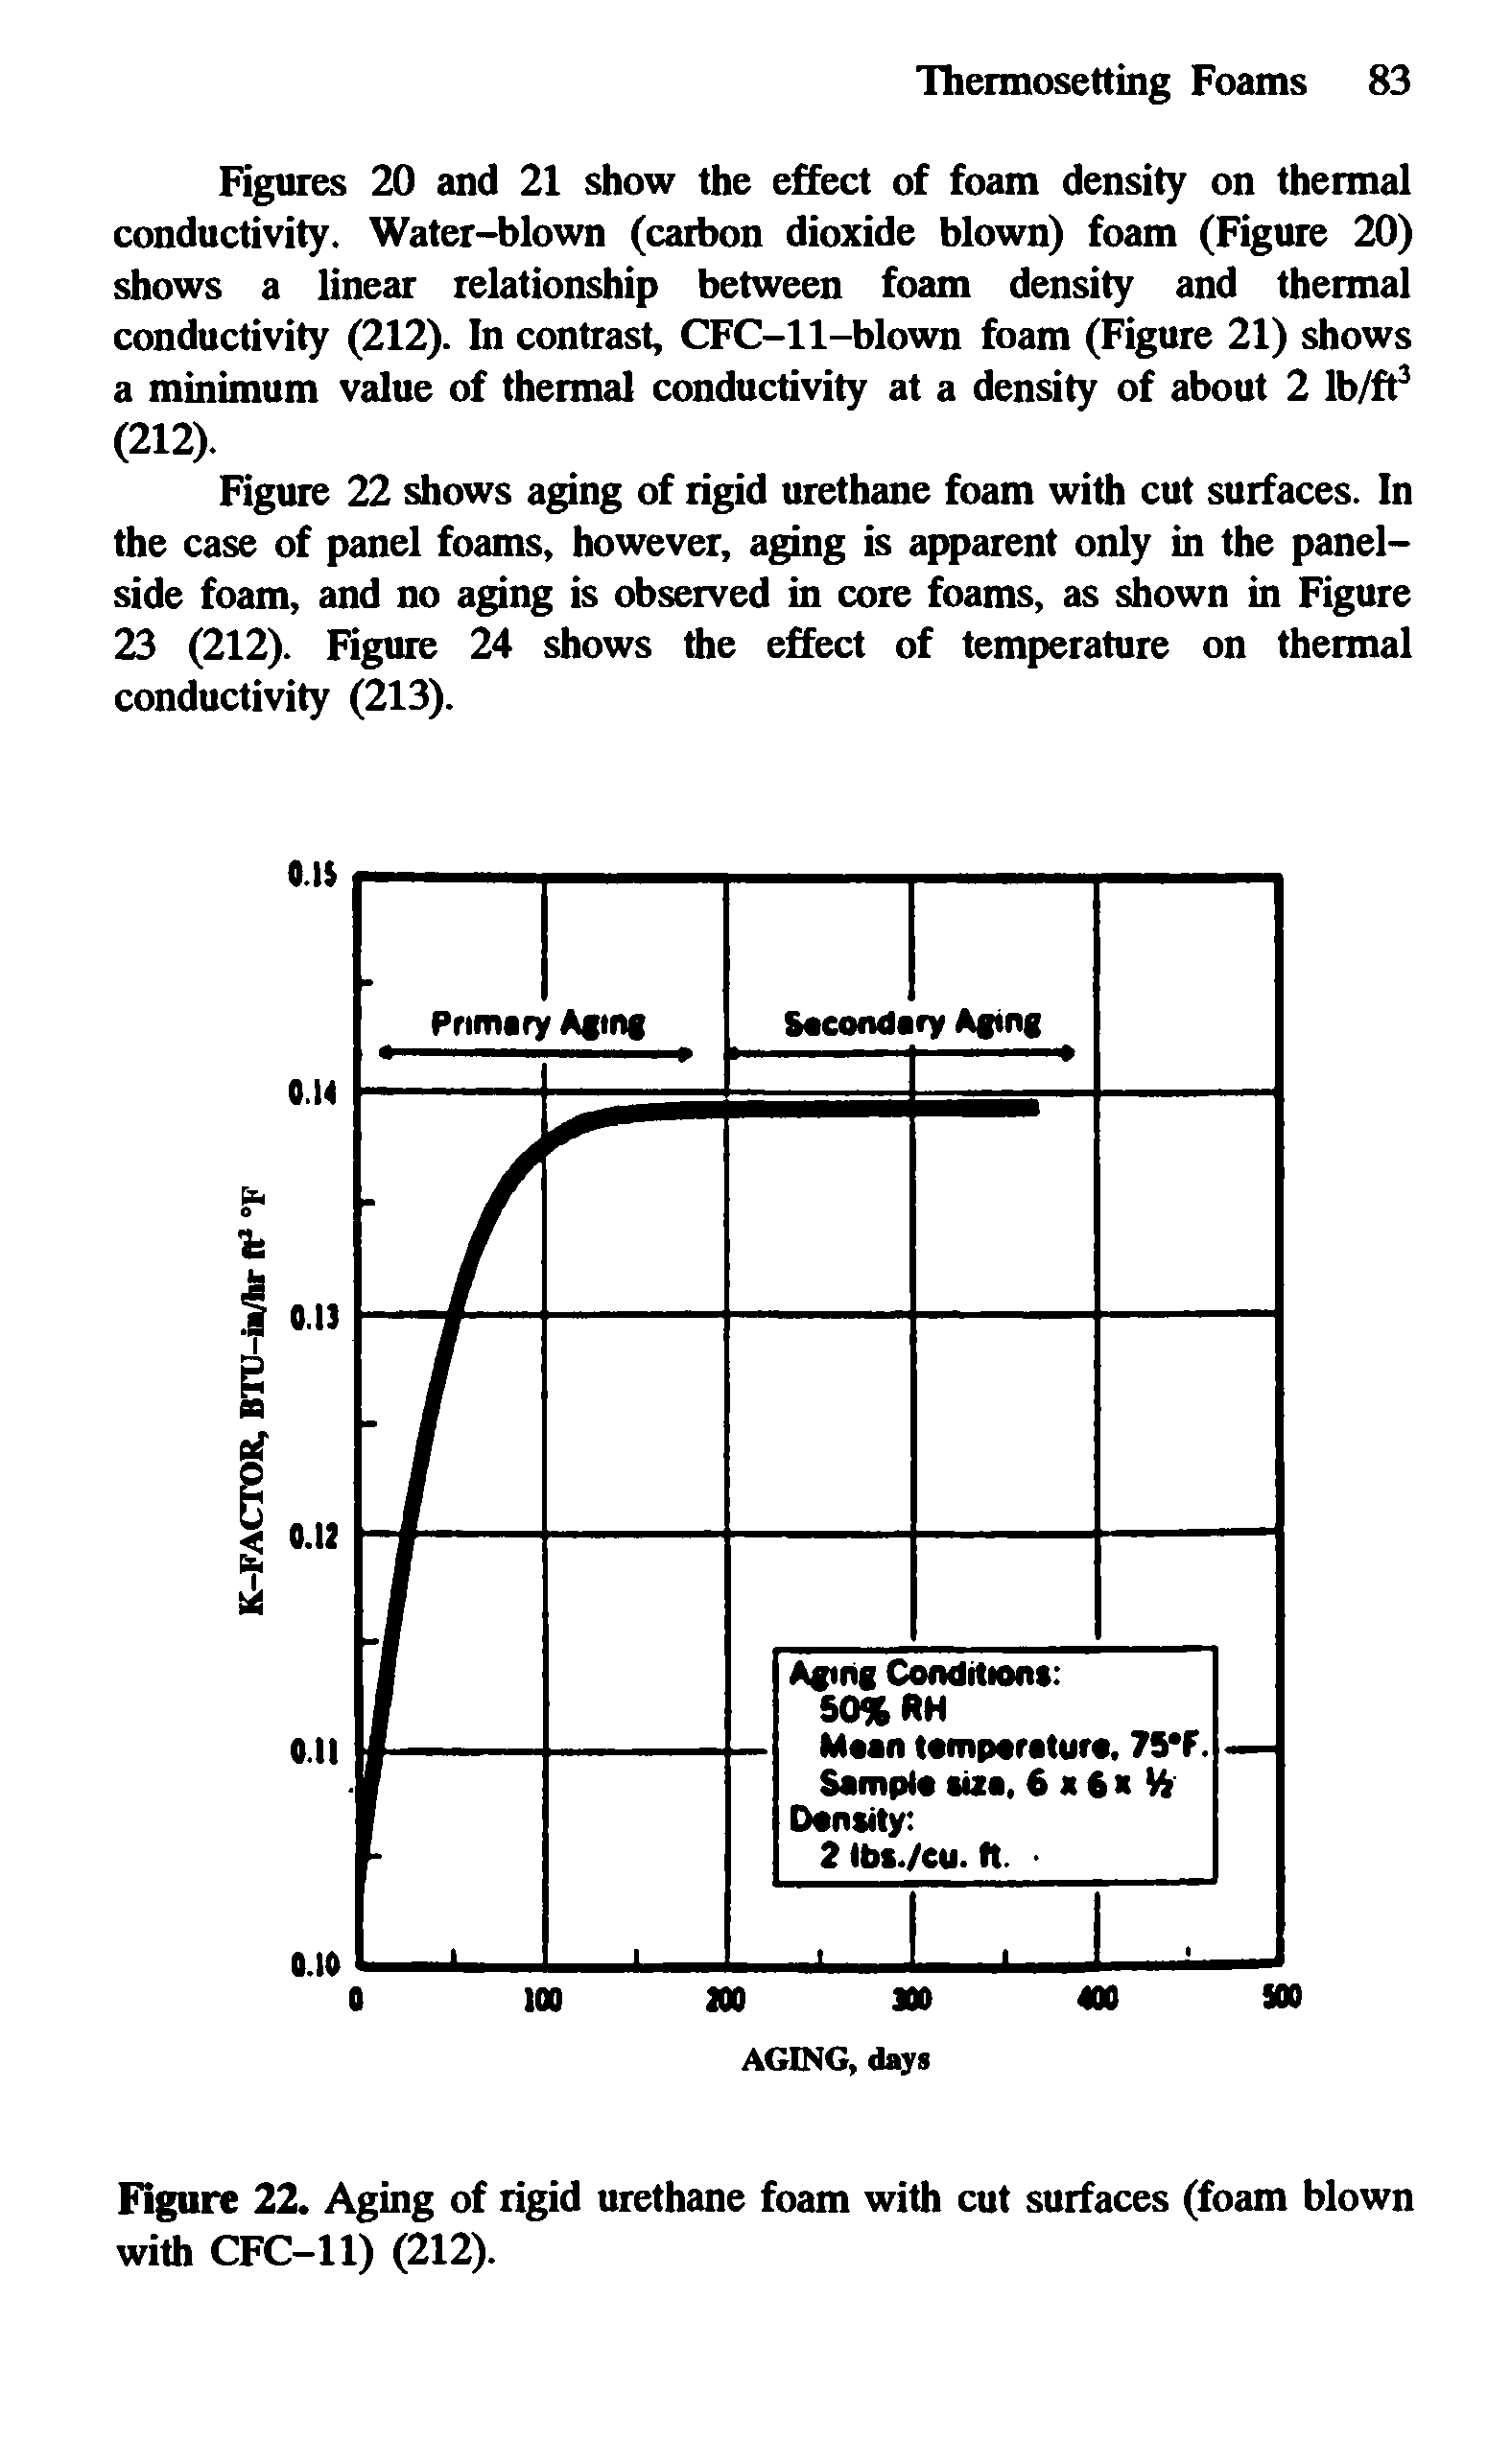 Figures 20 and 21 show the effect of foam density on thermal conductivity. Water-blown (carbon dioxide blown) foam (Figure 20) shows a linear relationship between foam density and thermal conductivity (212). In contrast, CFC-ll-blown foam (Figure 21) shows a minimum value of thermal conductivity at a density of about 2 Ib/ft (212).